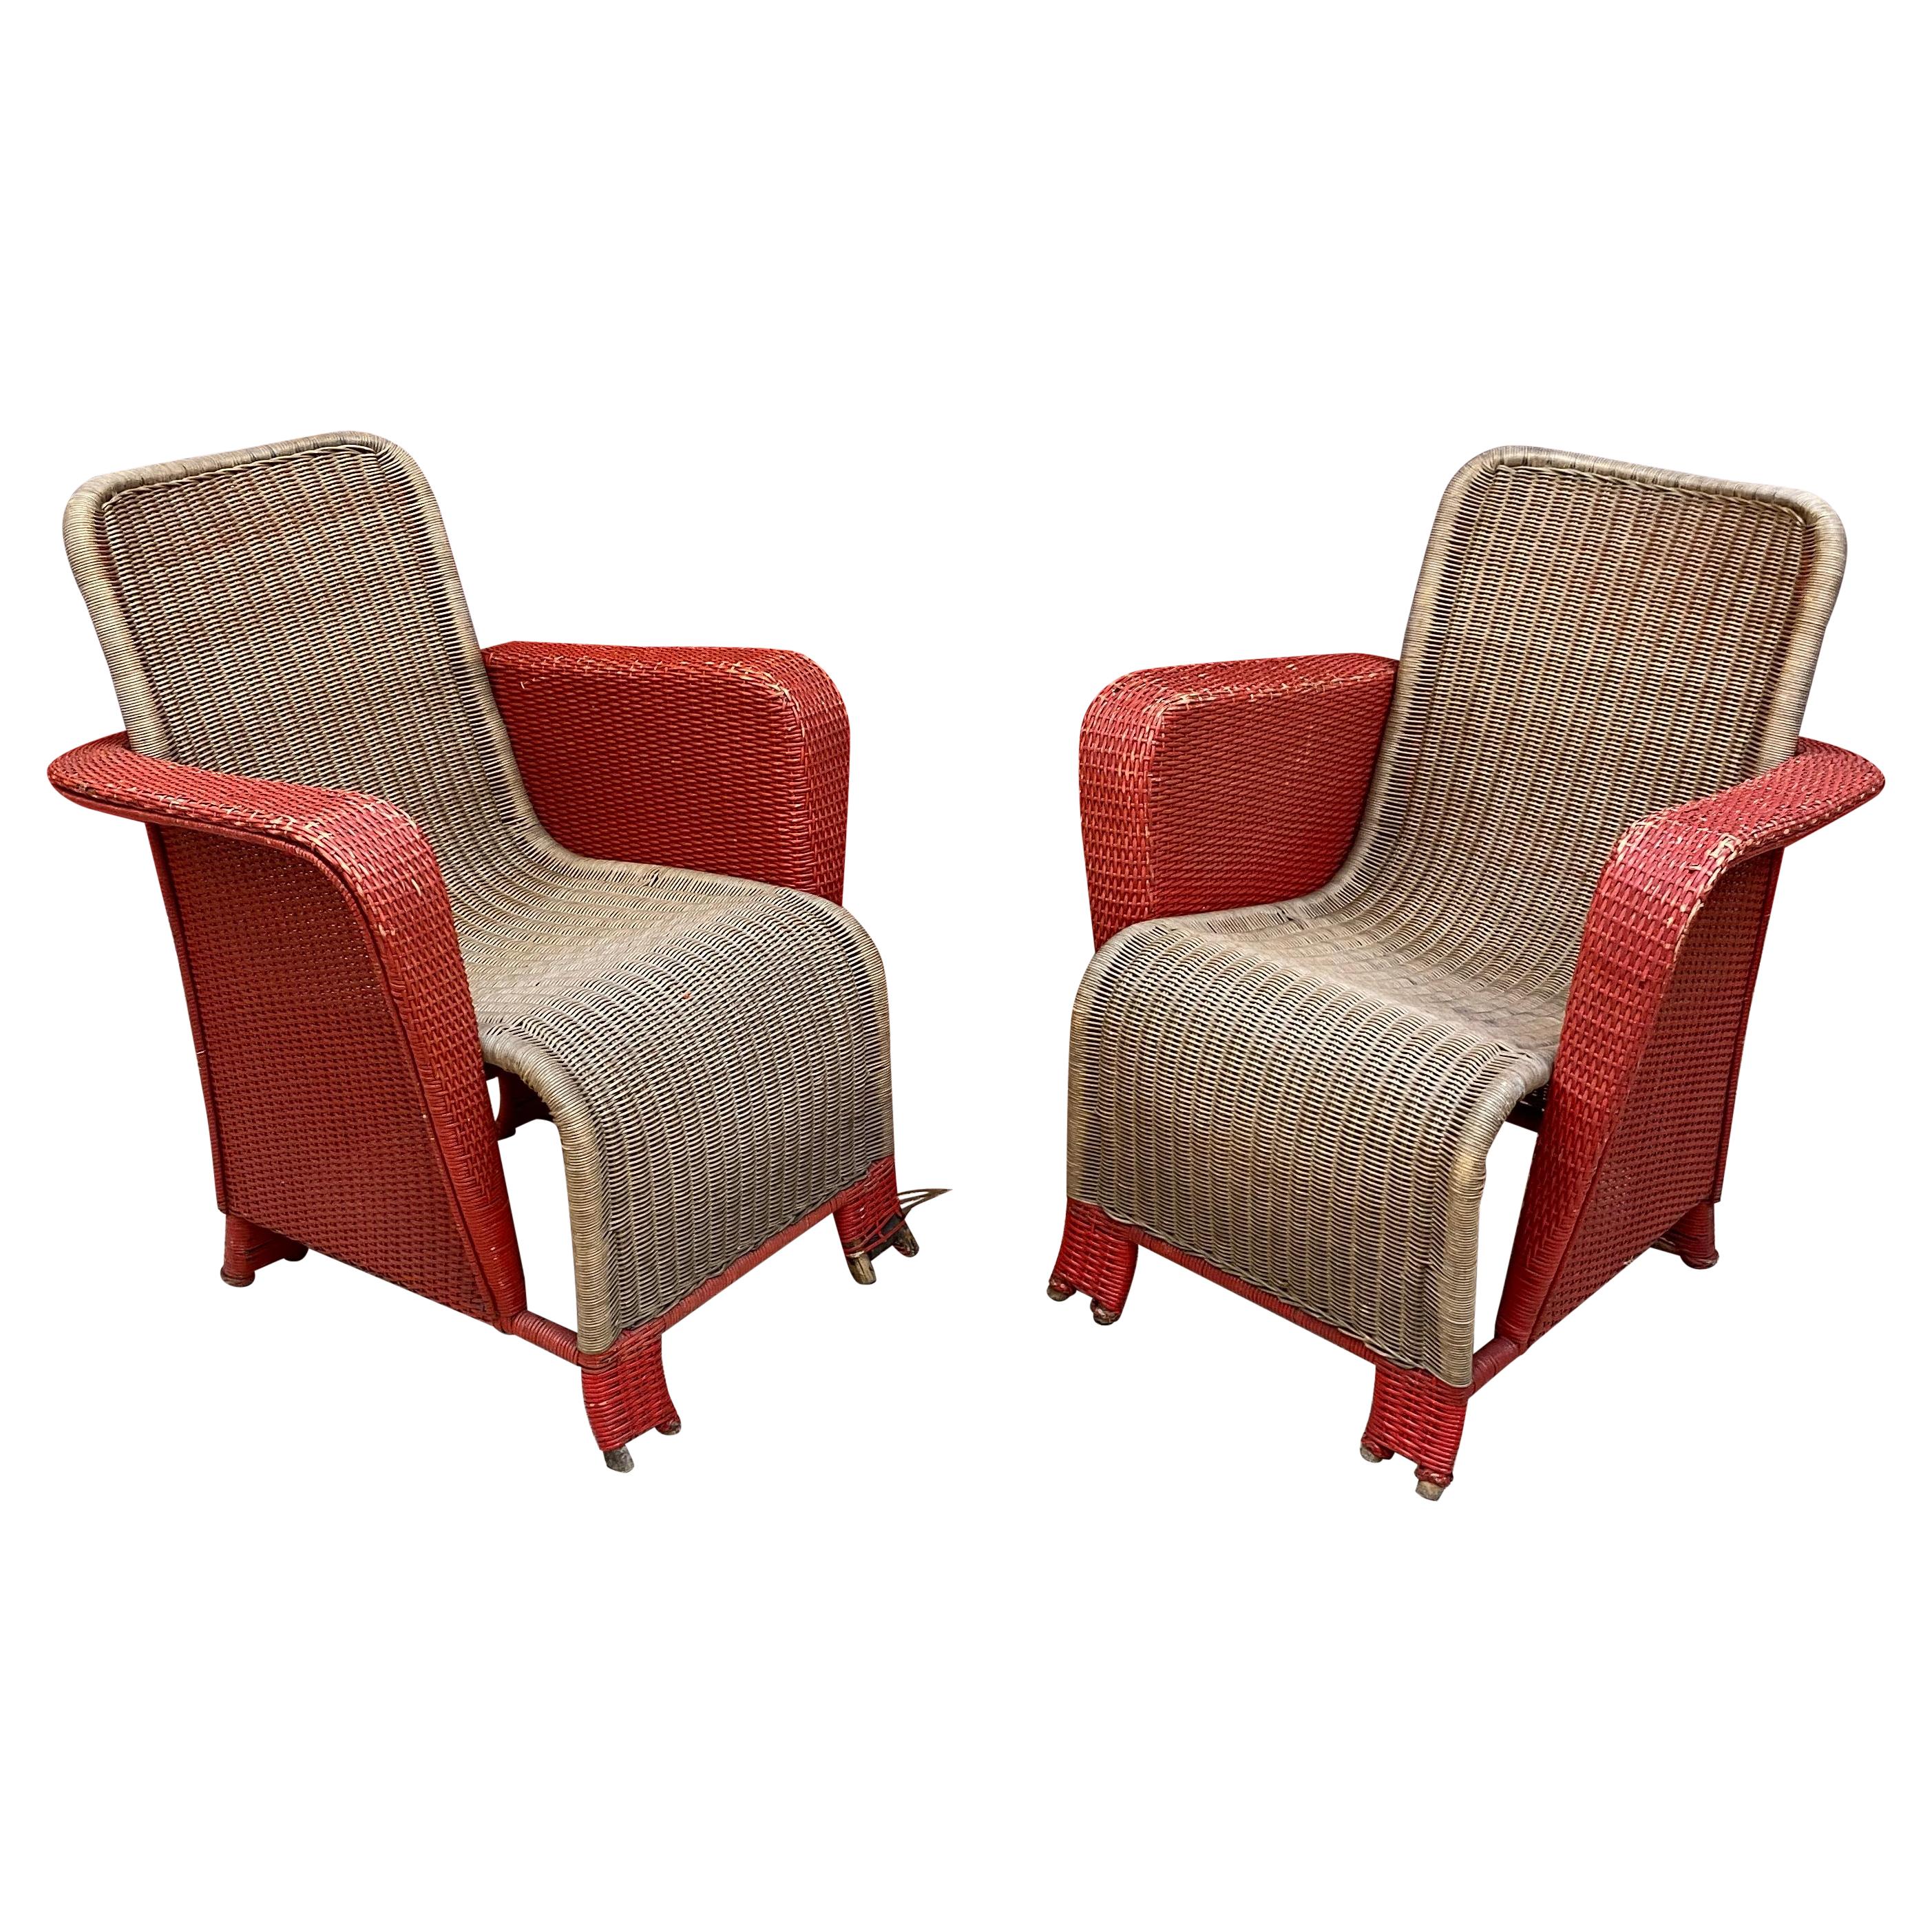 Pair of Art Deco Rattan Armchairs, circa 1930 For Sale